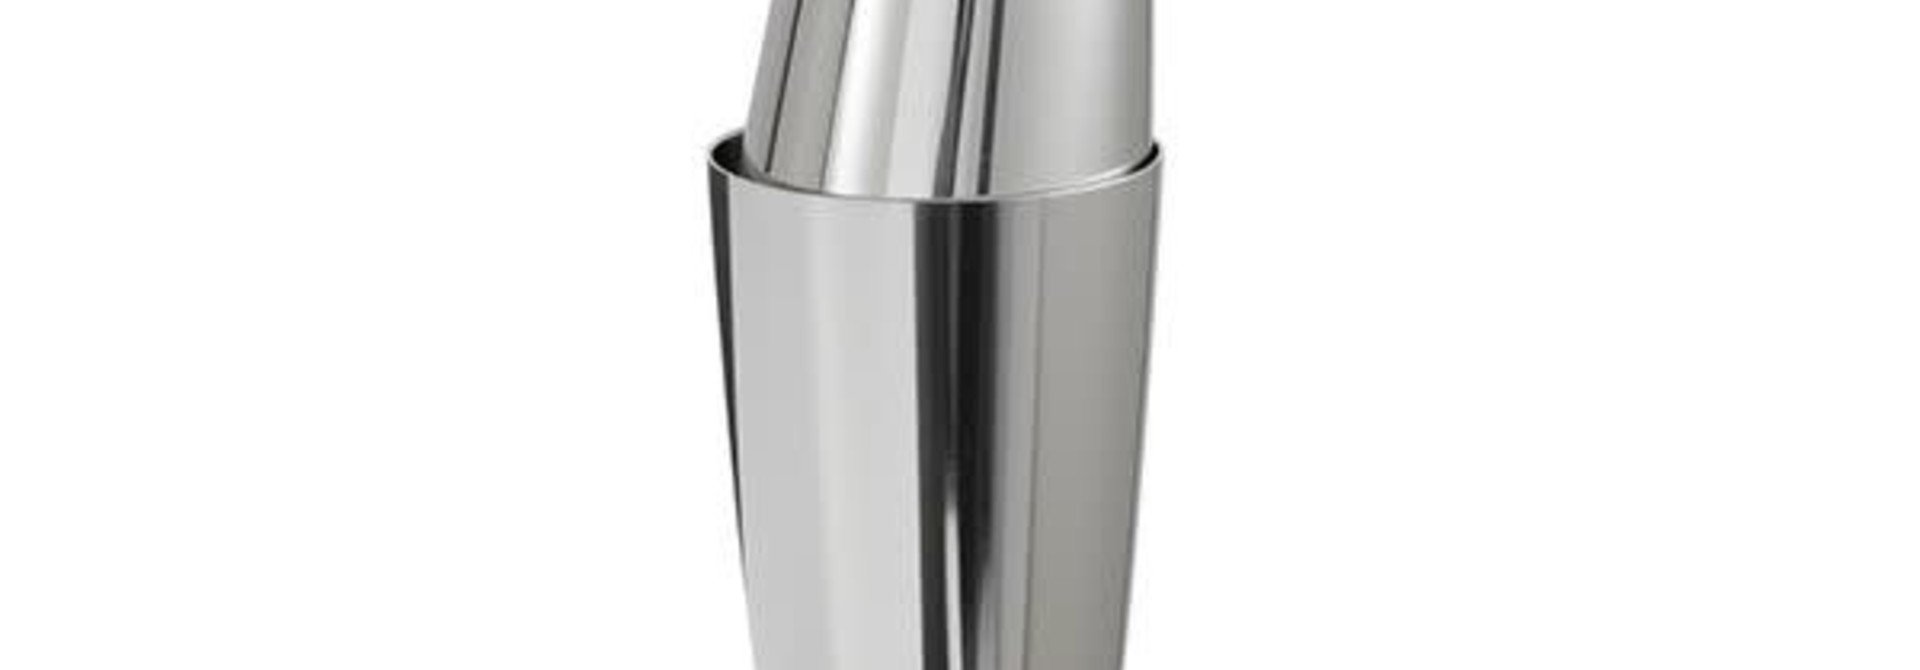 Boston Shaker | The EOD Bar Basics Collection, Stainless Steel - 11 Inch